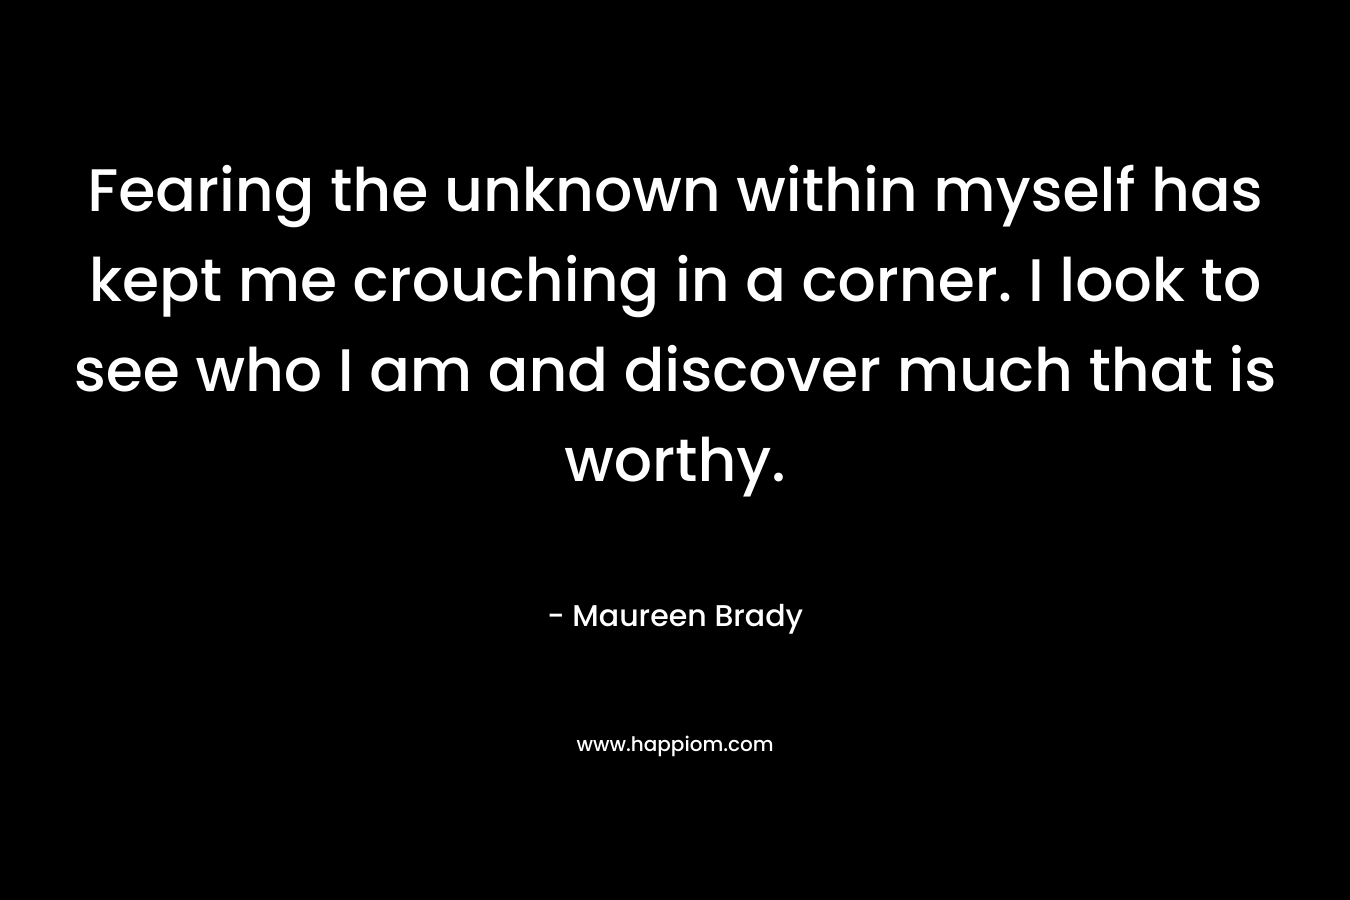 Fearing the unknown within myself has kept me crouching in a corner. I look to see who I am and discover much that is worthy. – Maureen Brady